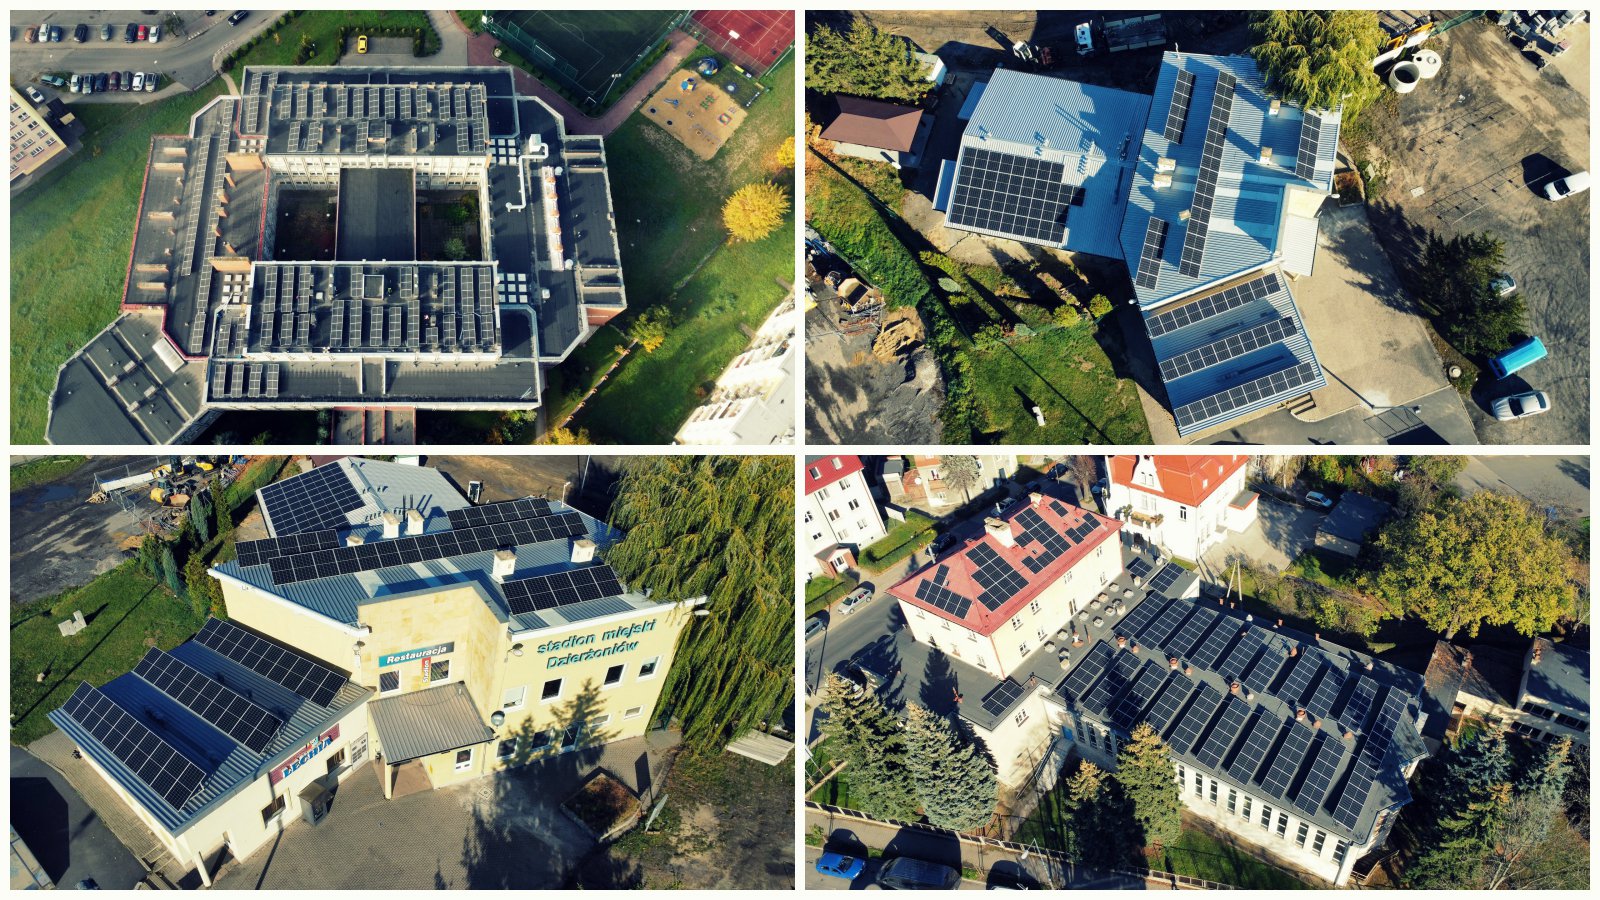 Photovoltaic installations on public facilities